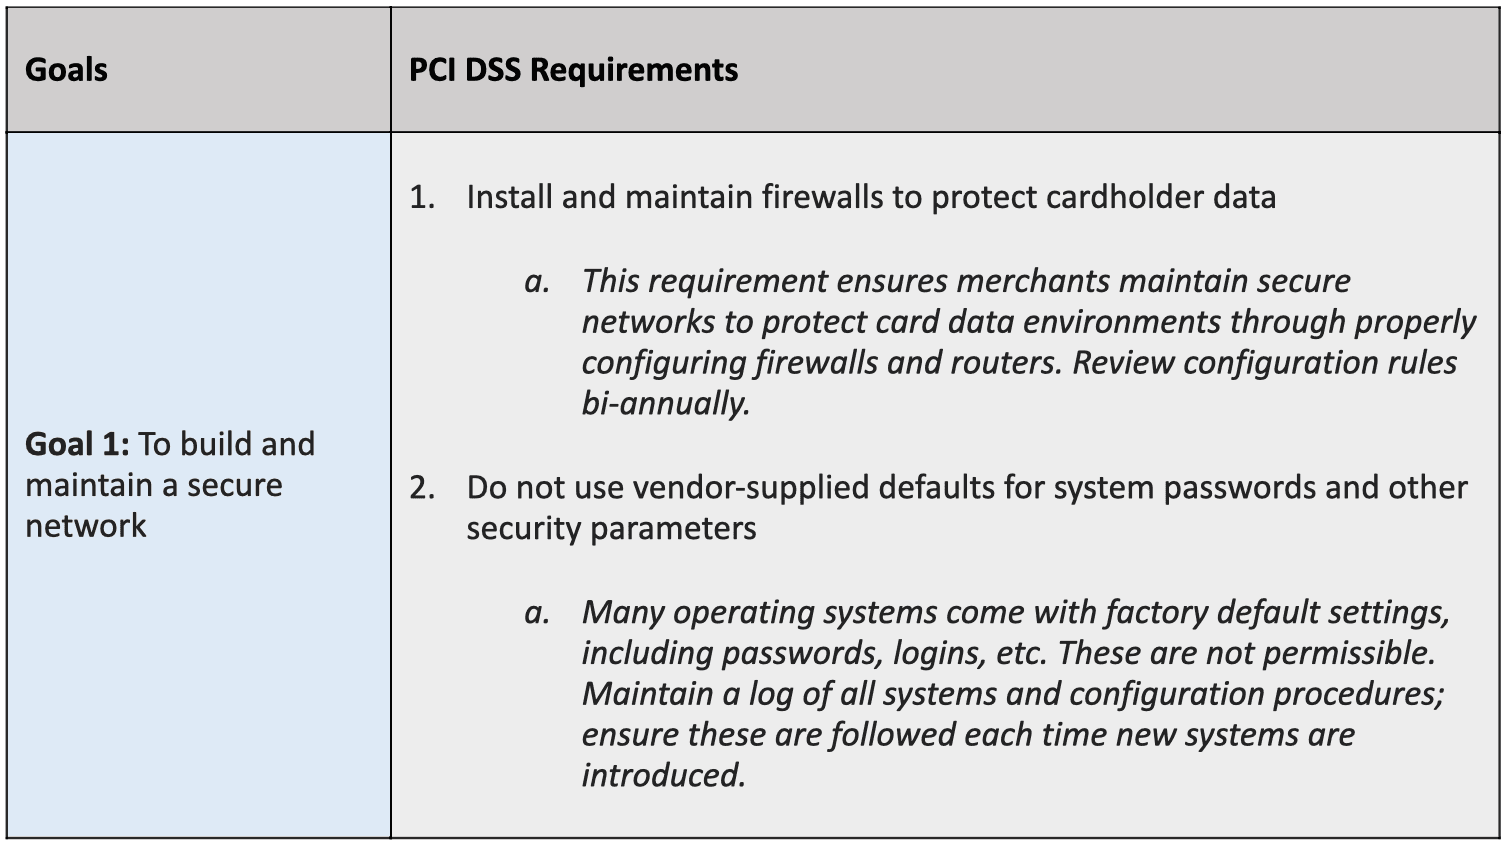 PCI DSS requirements goal 1